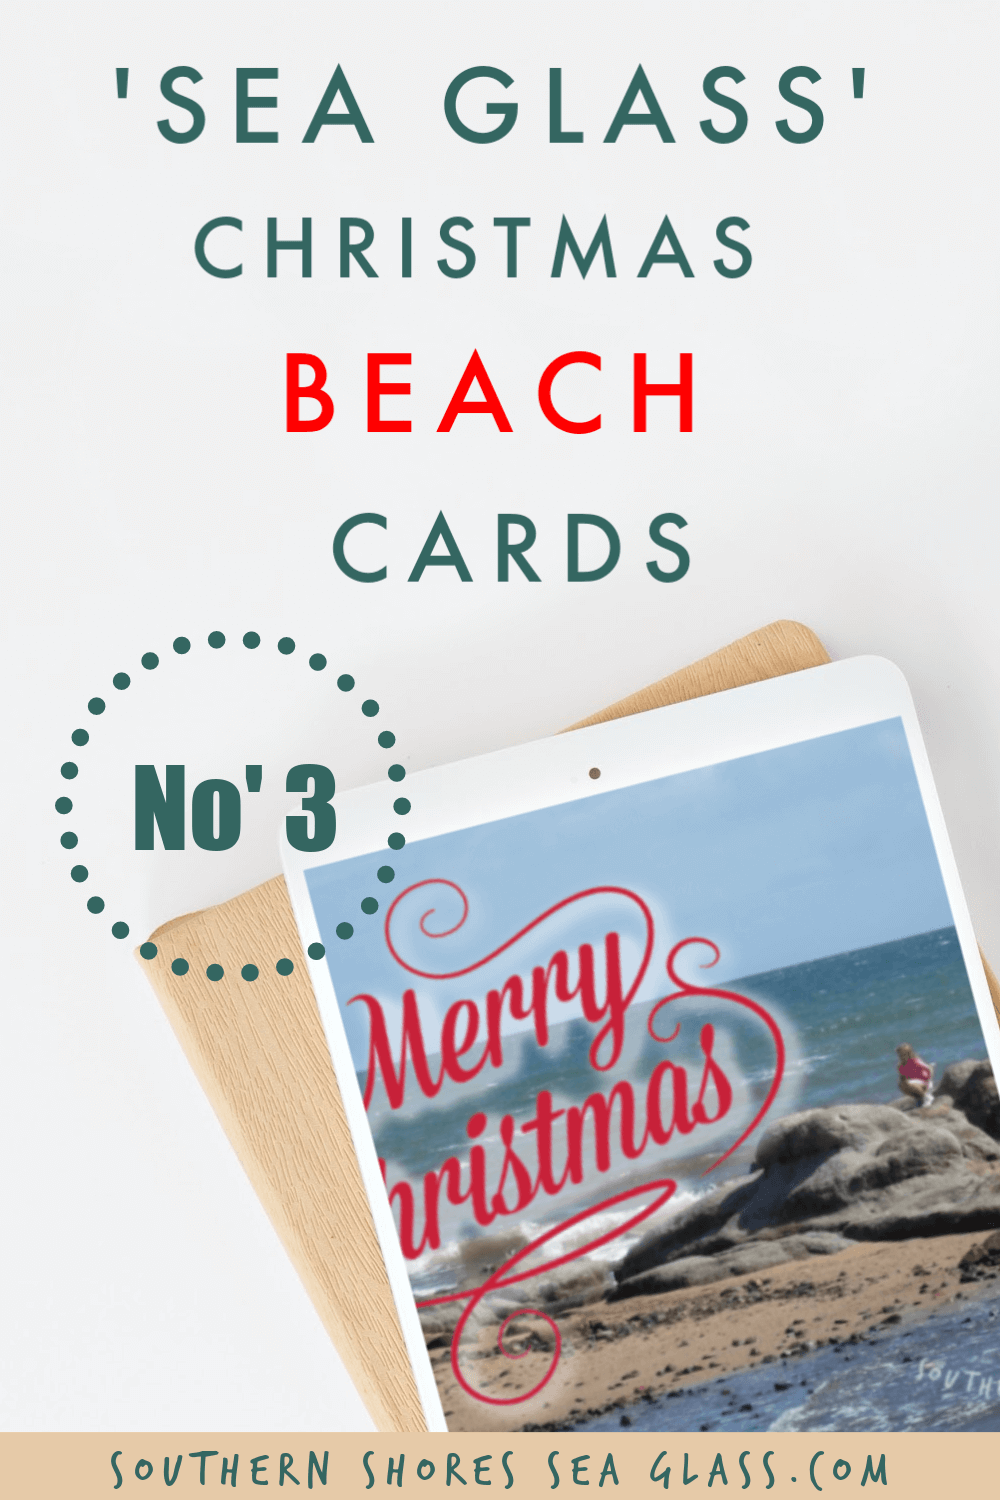 Create Beach Themed Christmas Cards using some of your own Sea Glass you've collected over the years adding a unique personal touch for your family and friends